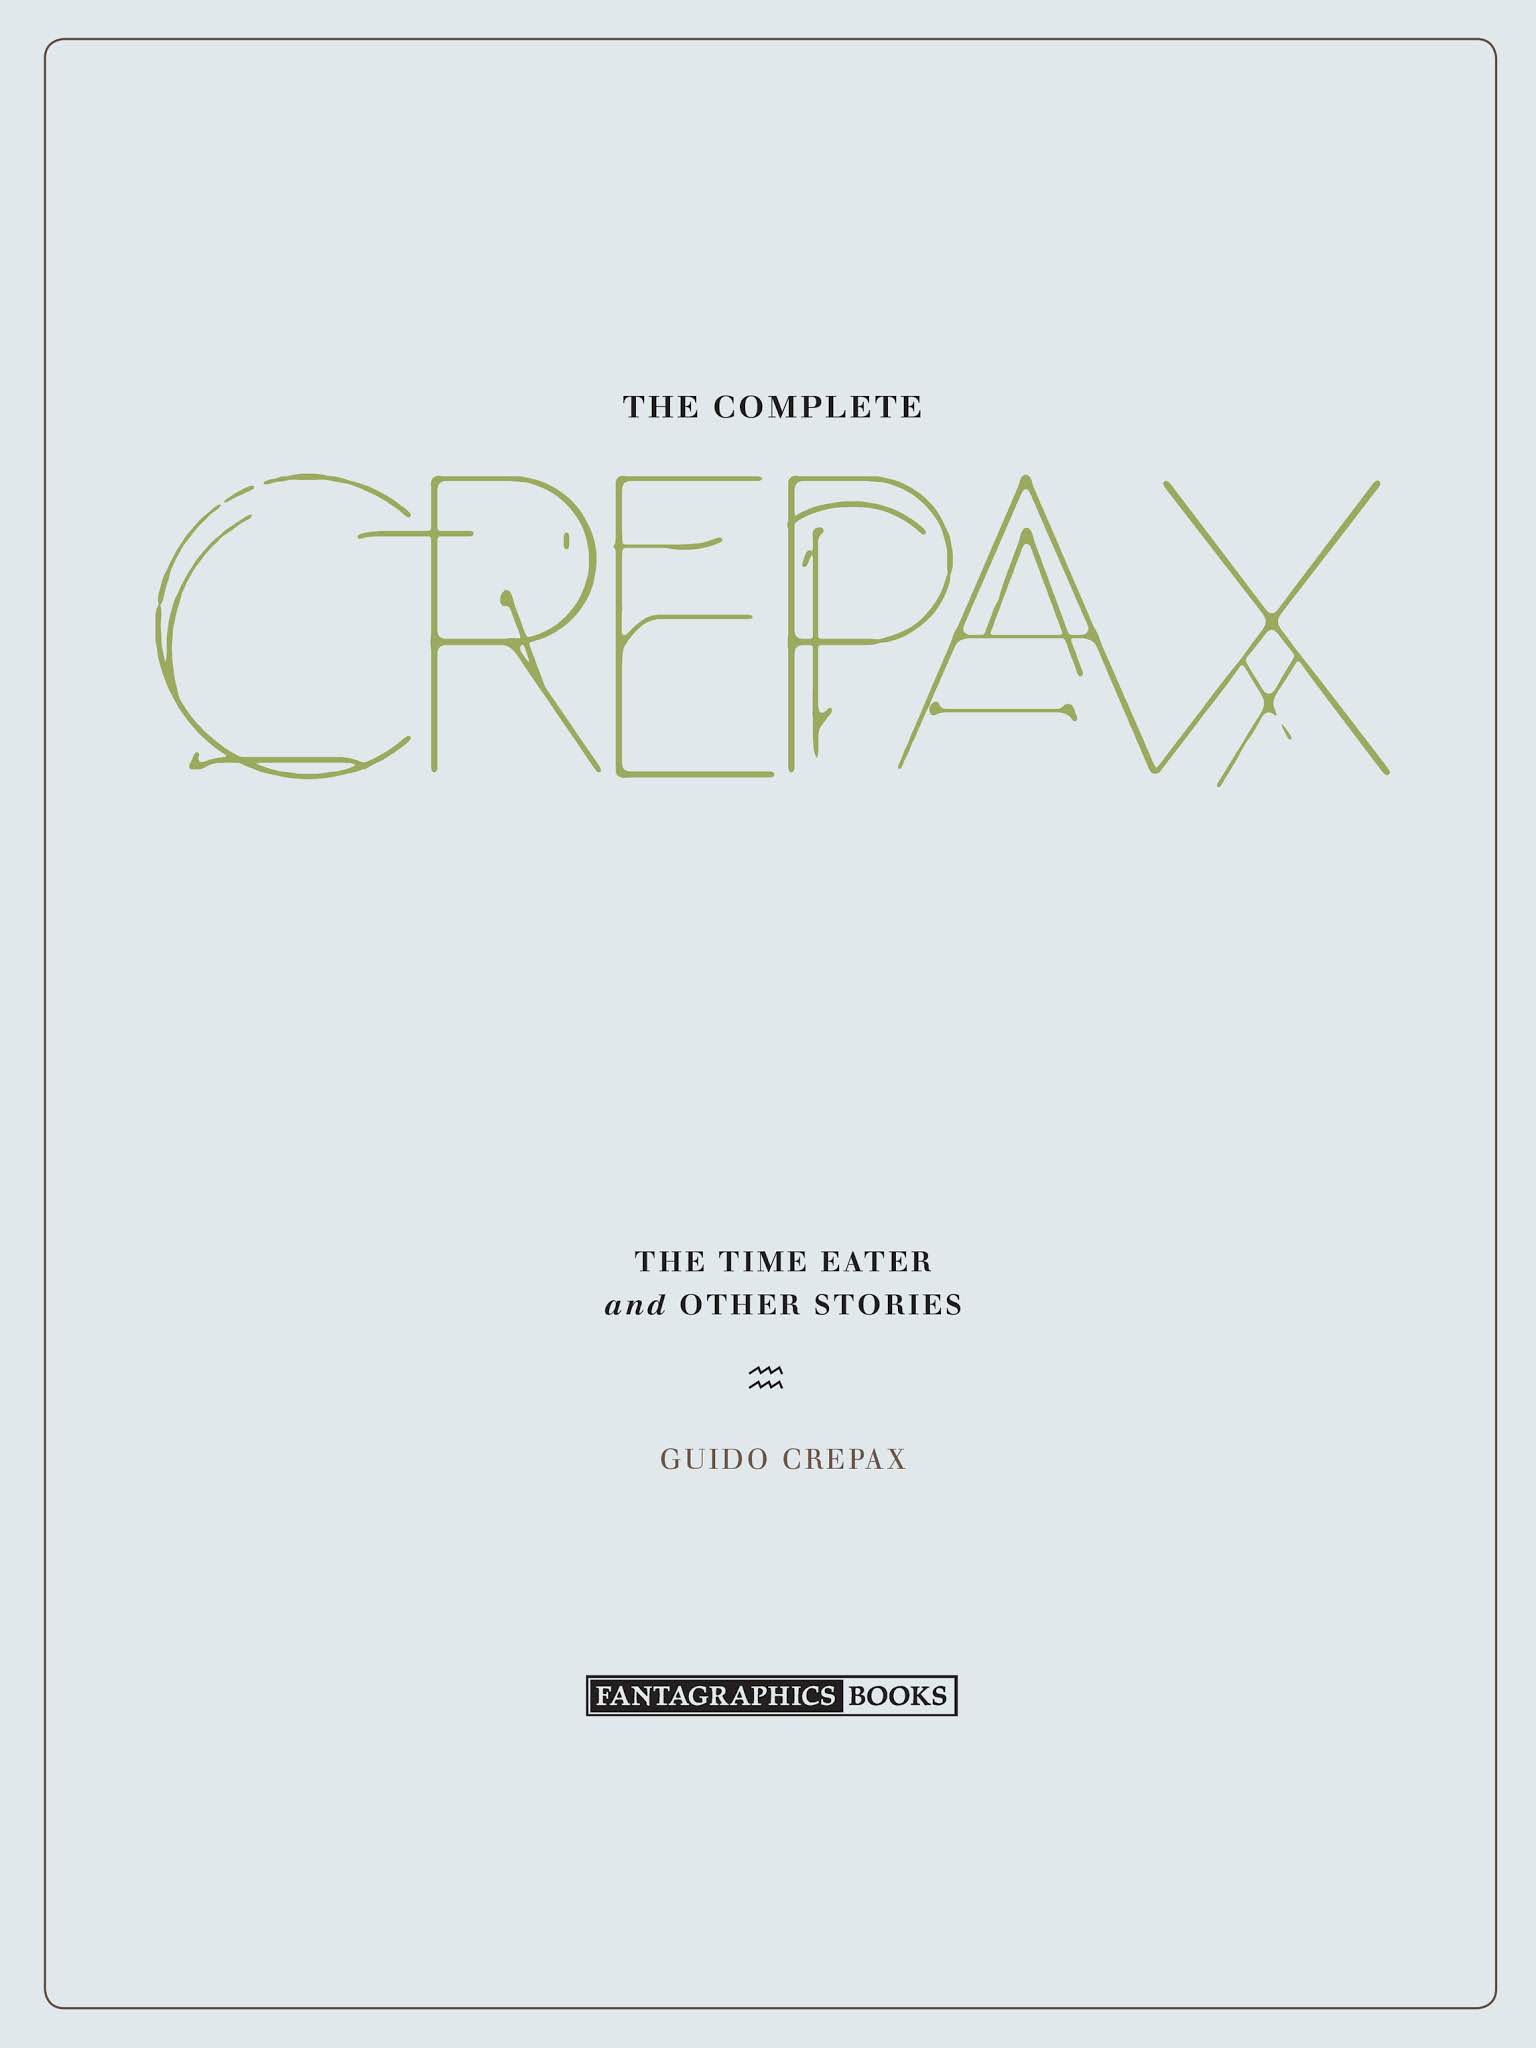 Read online The Complete Crepax comic -  Issue # TPB 2 - 4